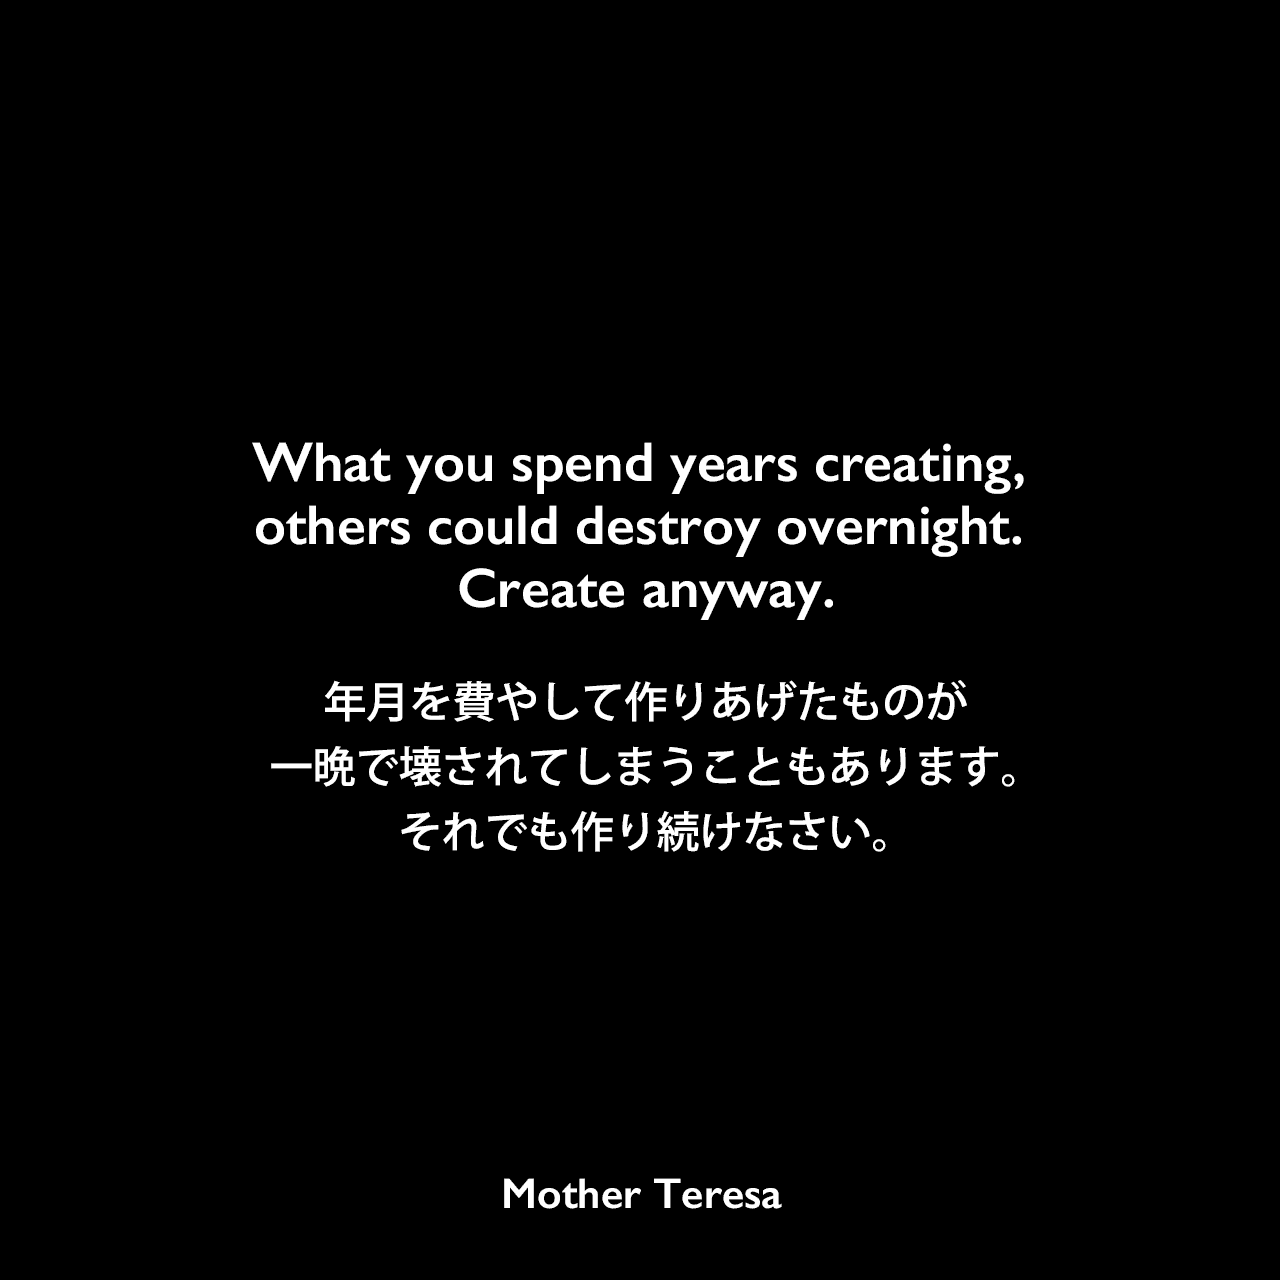 What you spend years creating, others could destroy overnight. Create anyway.年月を費やして作りあげたものが、一晩で壊されてしまうこともあります。それでも作り続けなさい。Mother Teresa